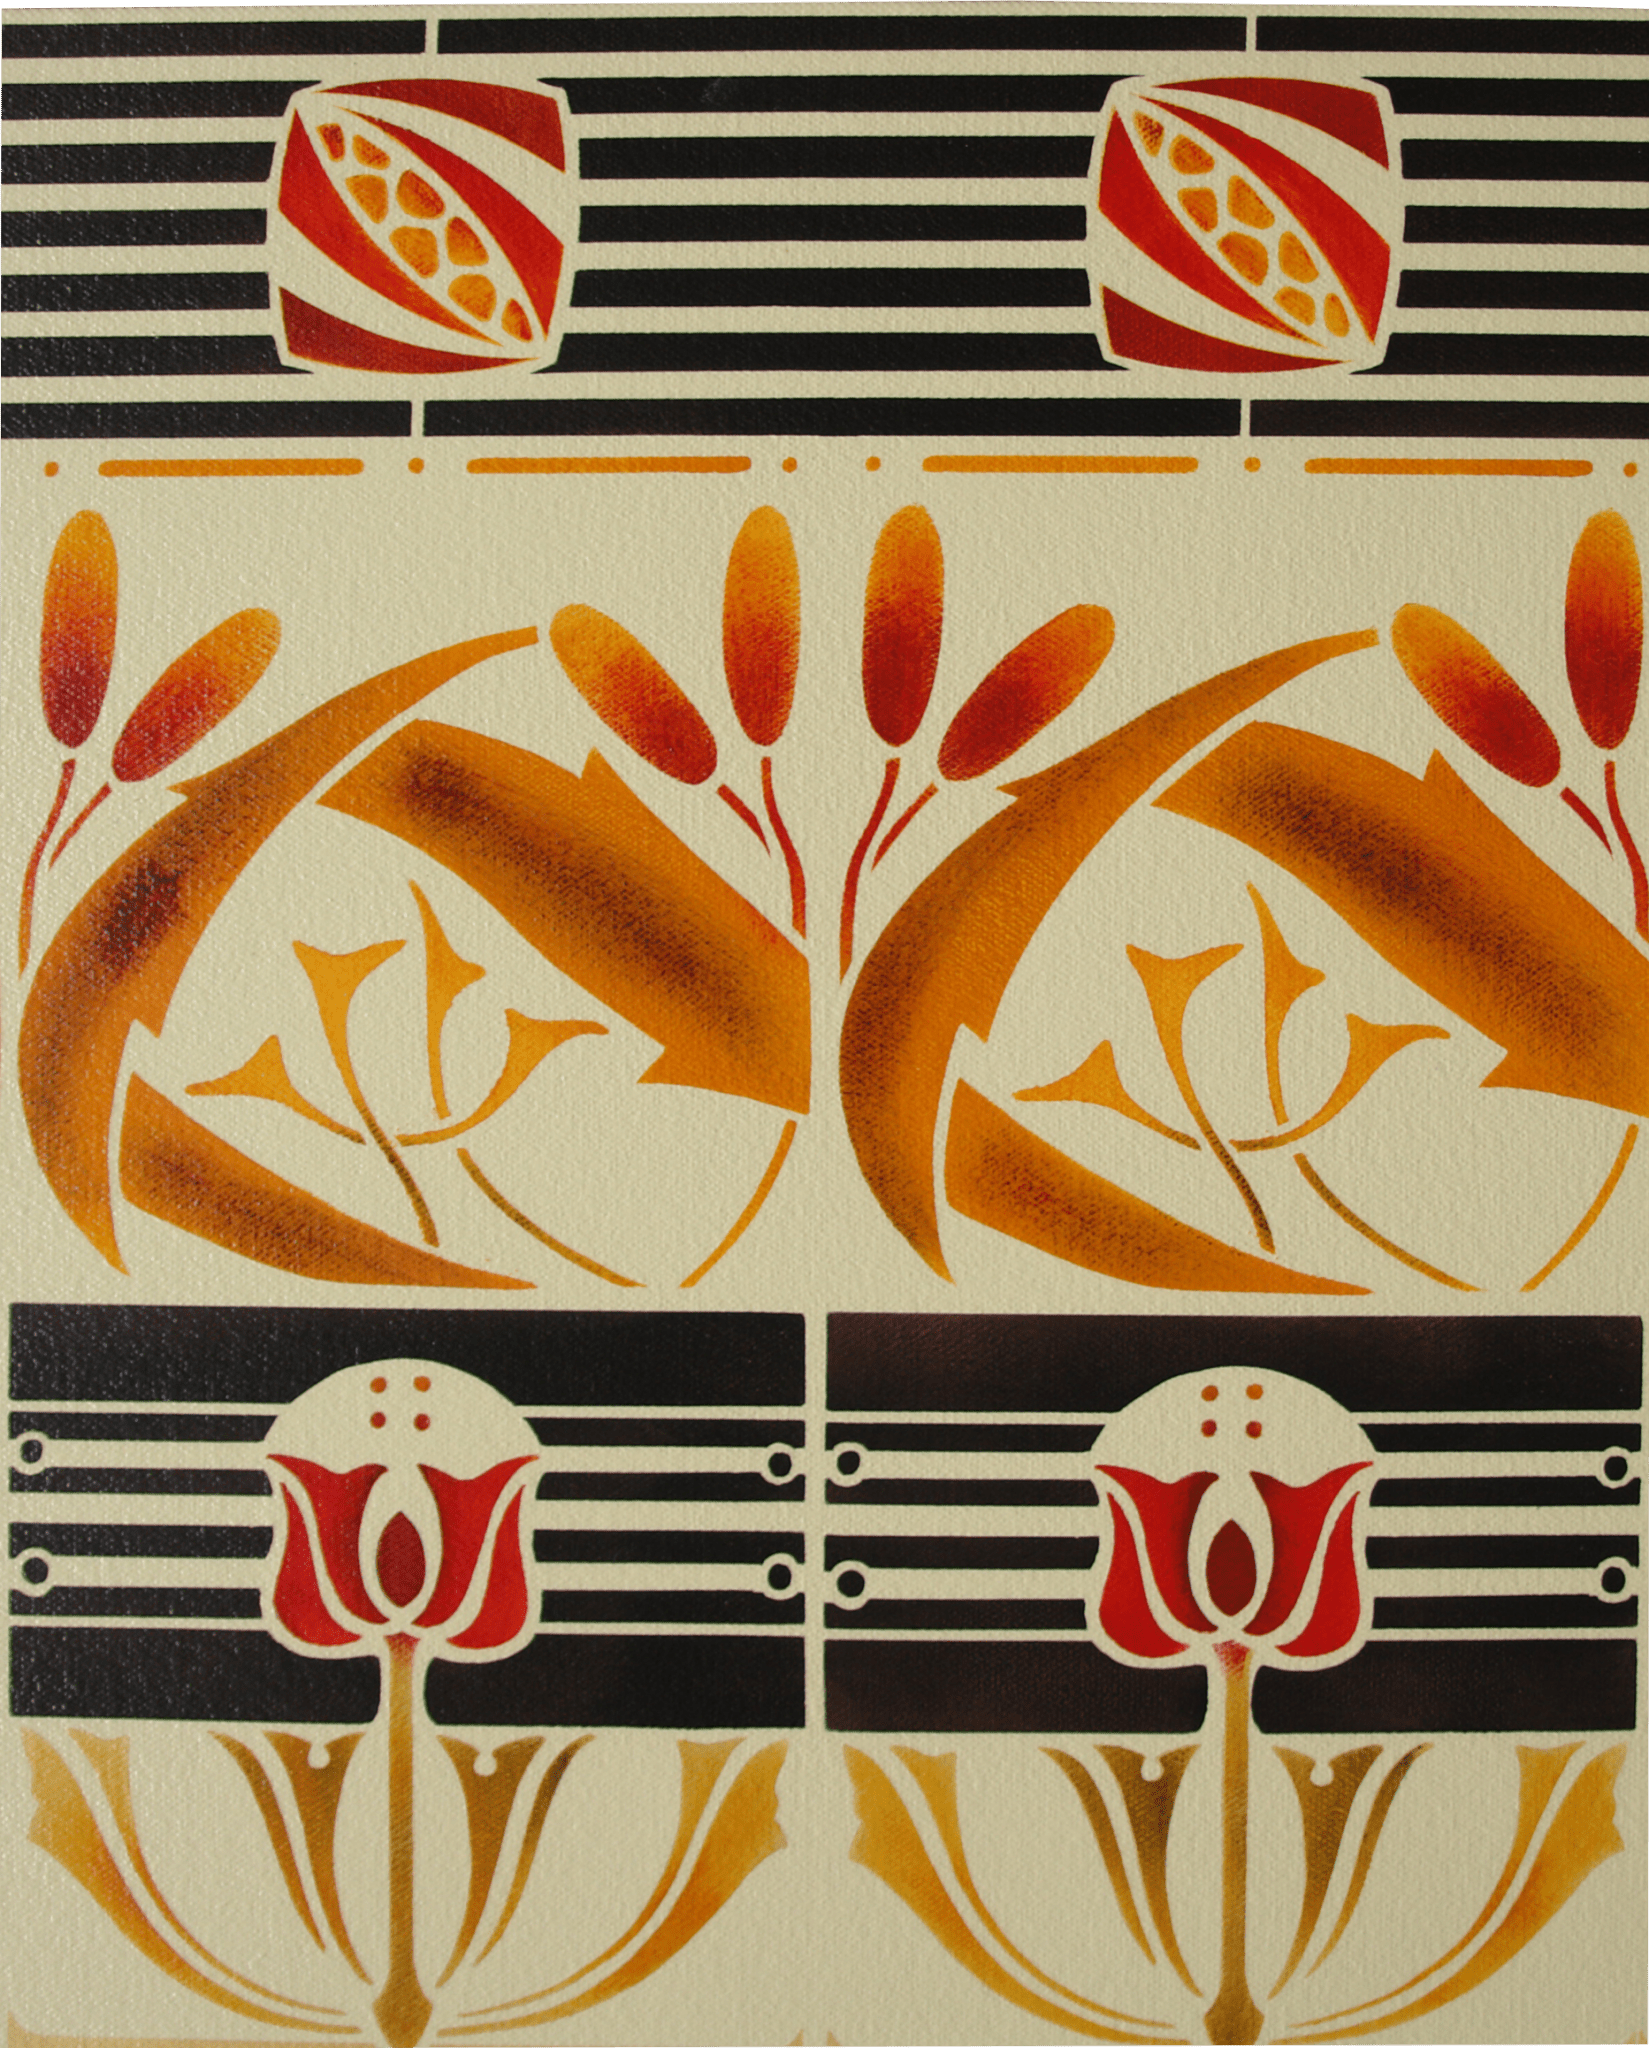 A close up of the border of Wunderlich Floorcloth #2.